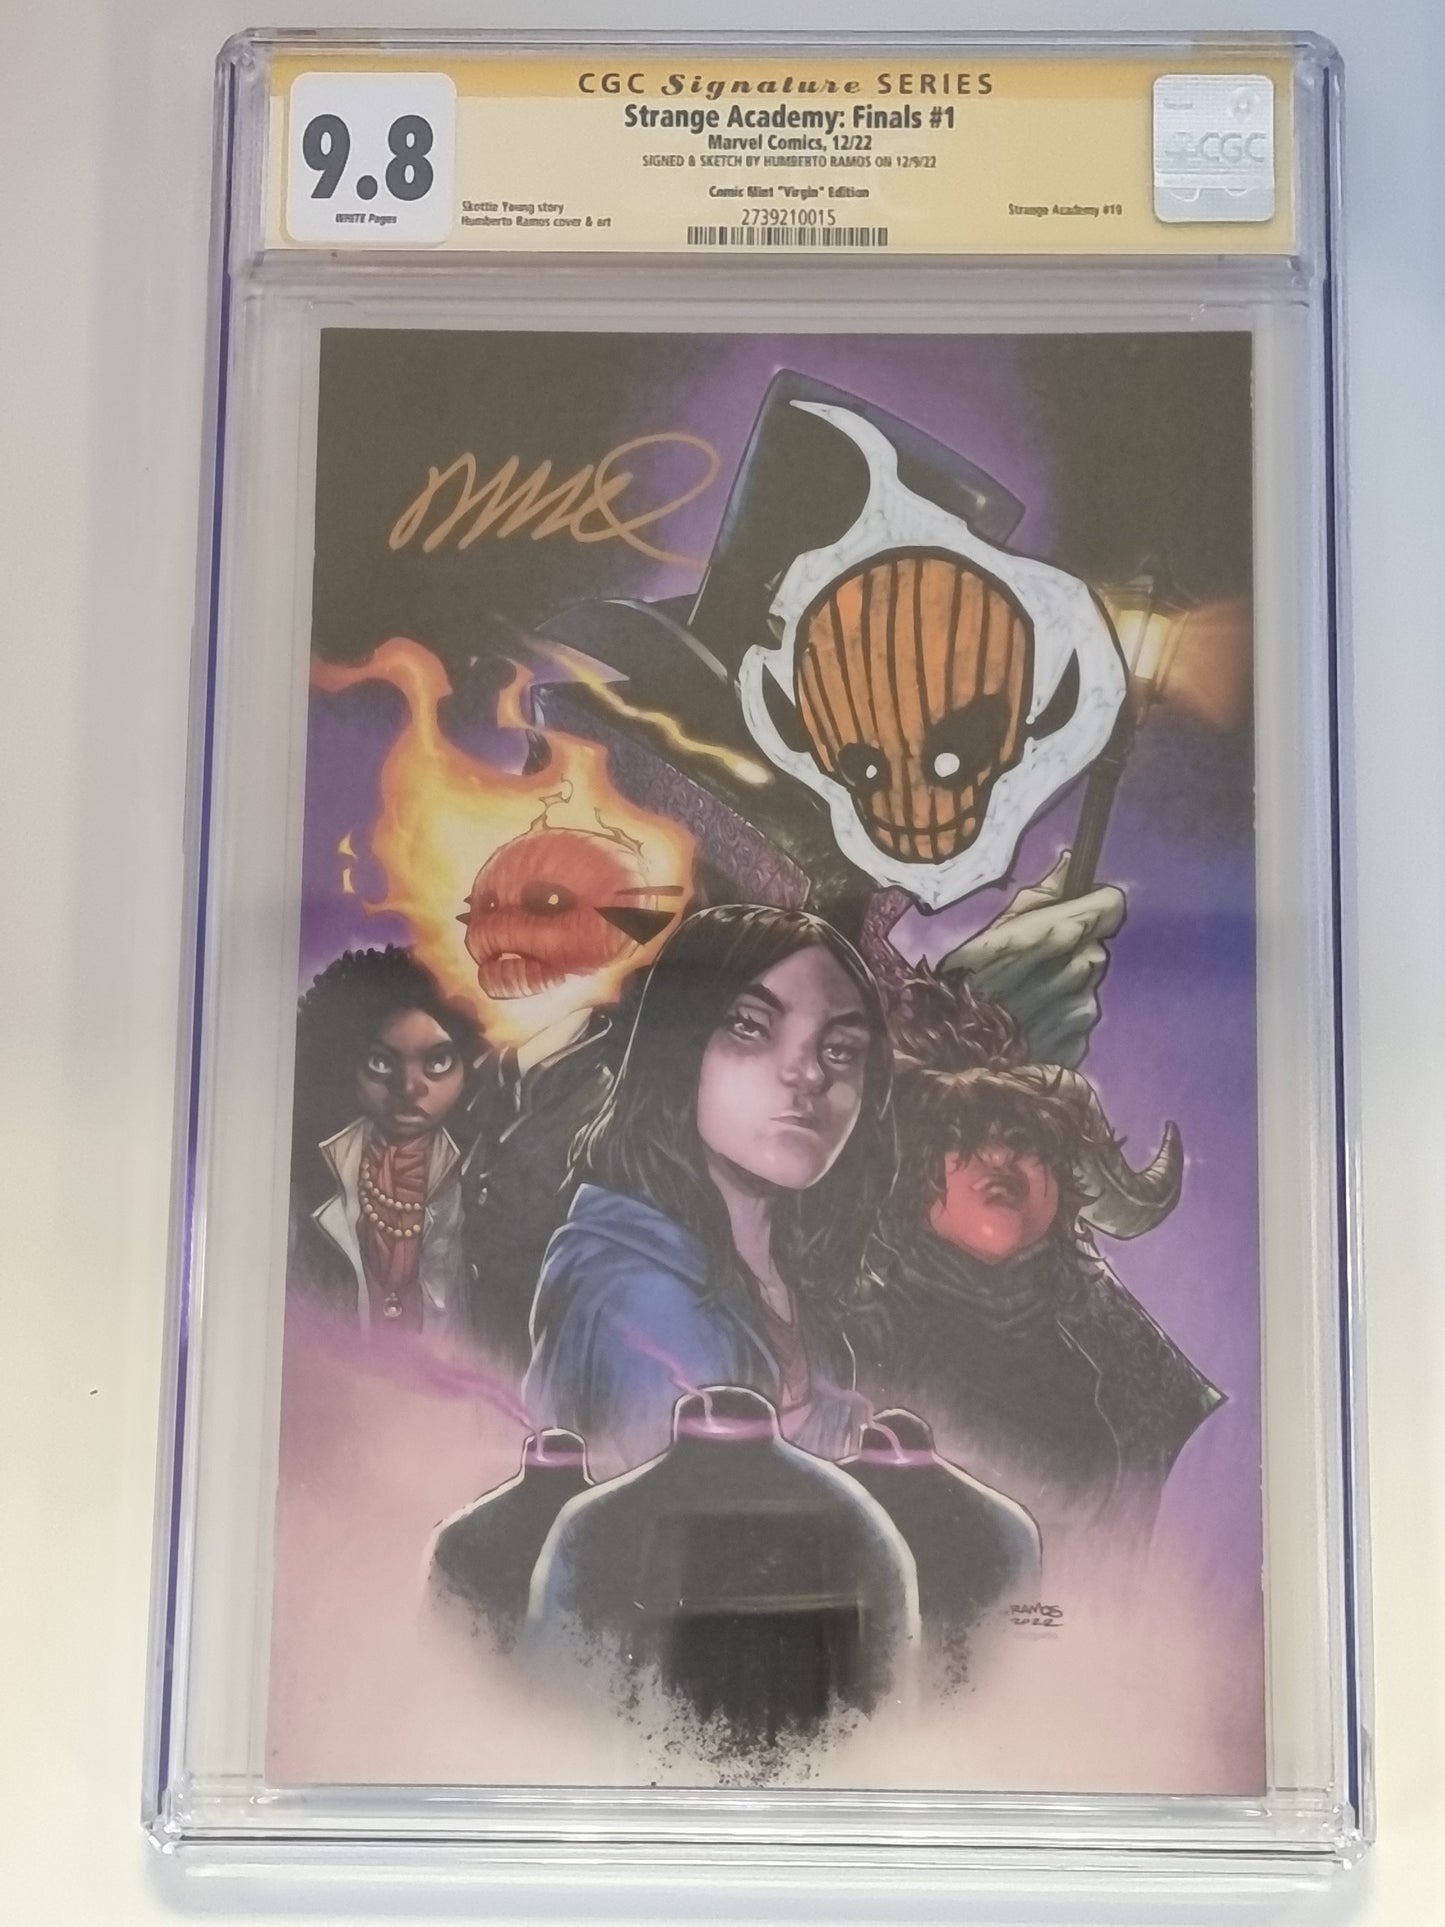 STRANGE ACADEMY FINALS #1 HUMBERTO RAMOS VIRGIN VARIANT LIMITED TO 800 WITH NUMBERED COA CGC 9.8 REMARK